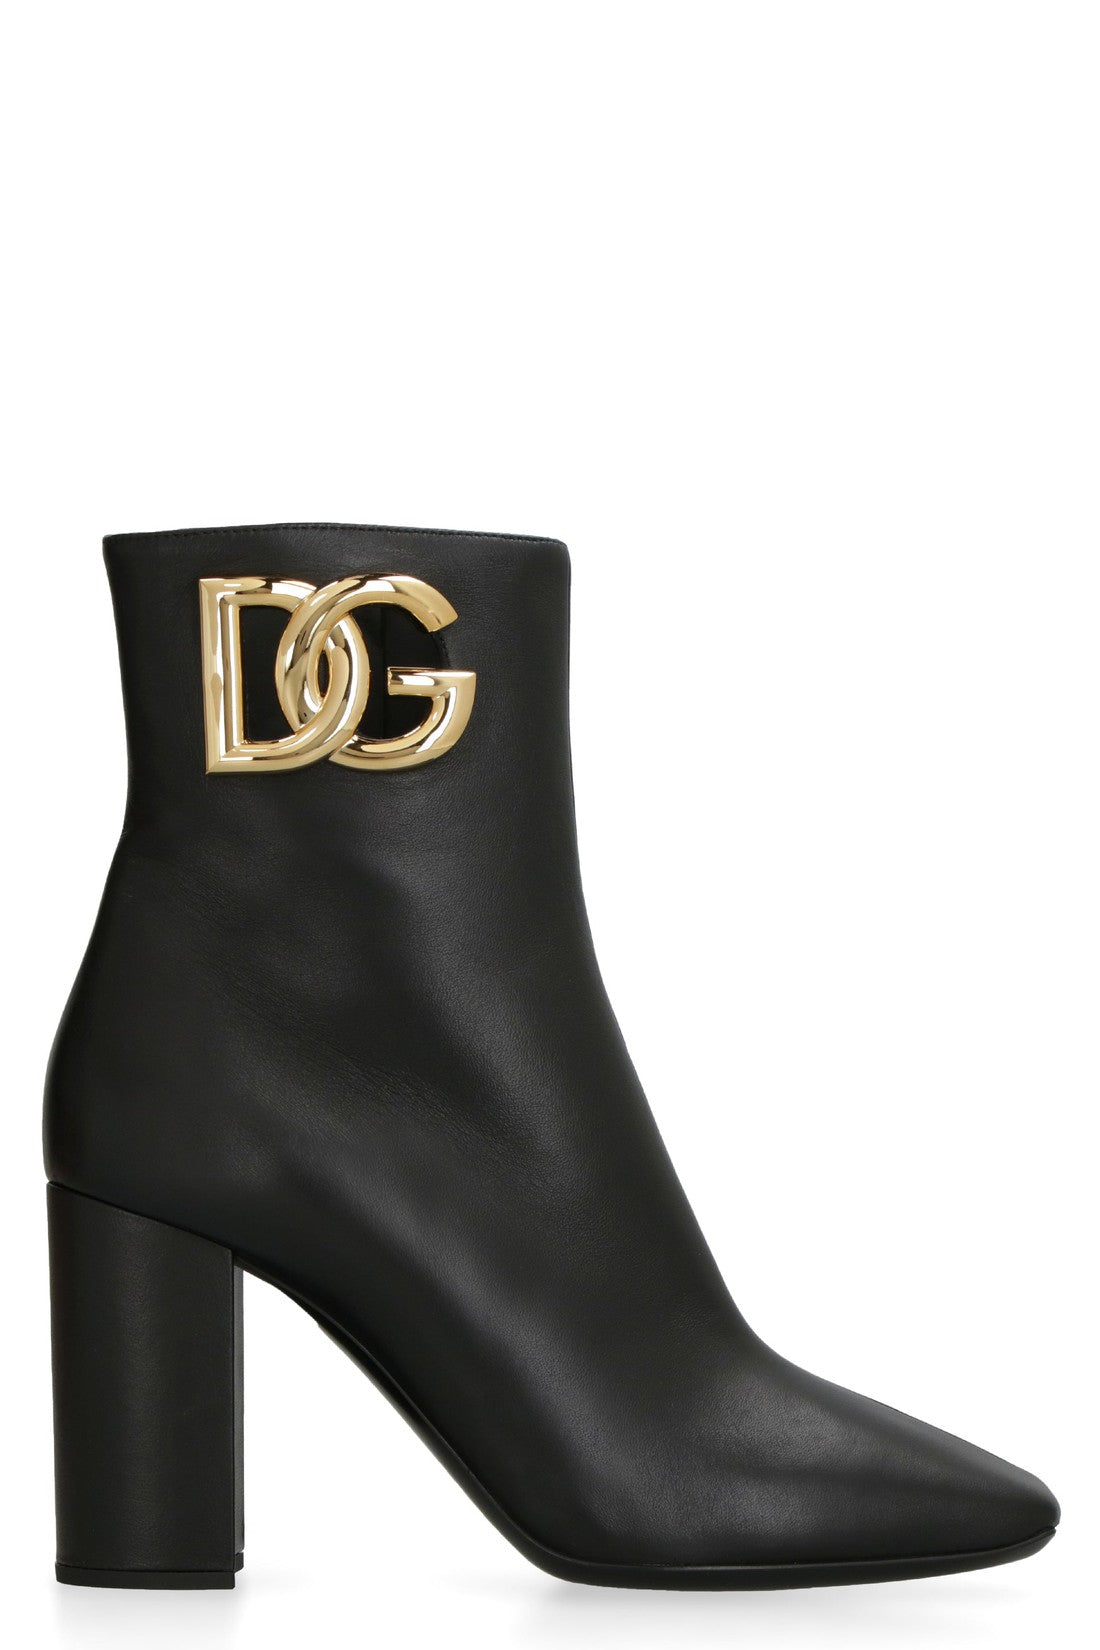 Dolce & Gabbana-OUTLET-SALE-Jackie nappa ankle boots-ARCHIVIST